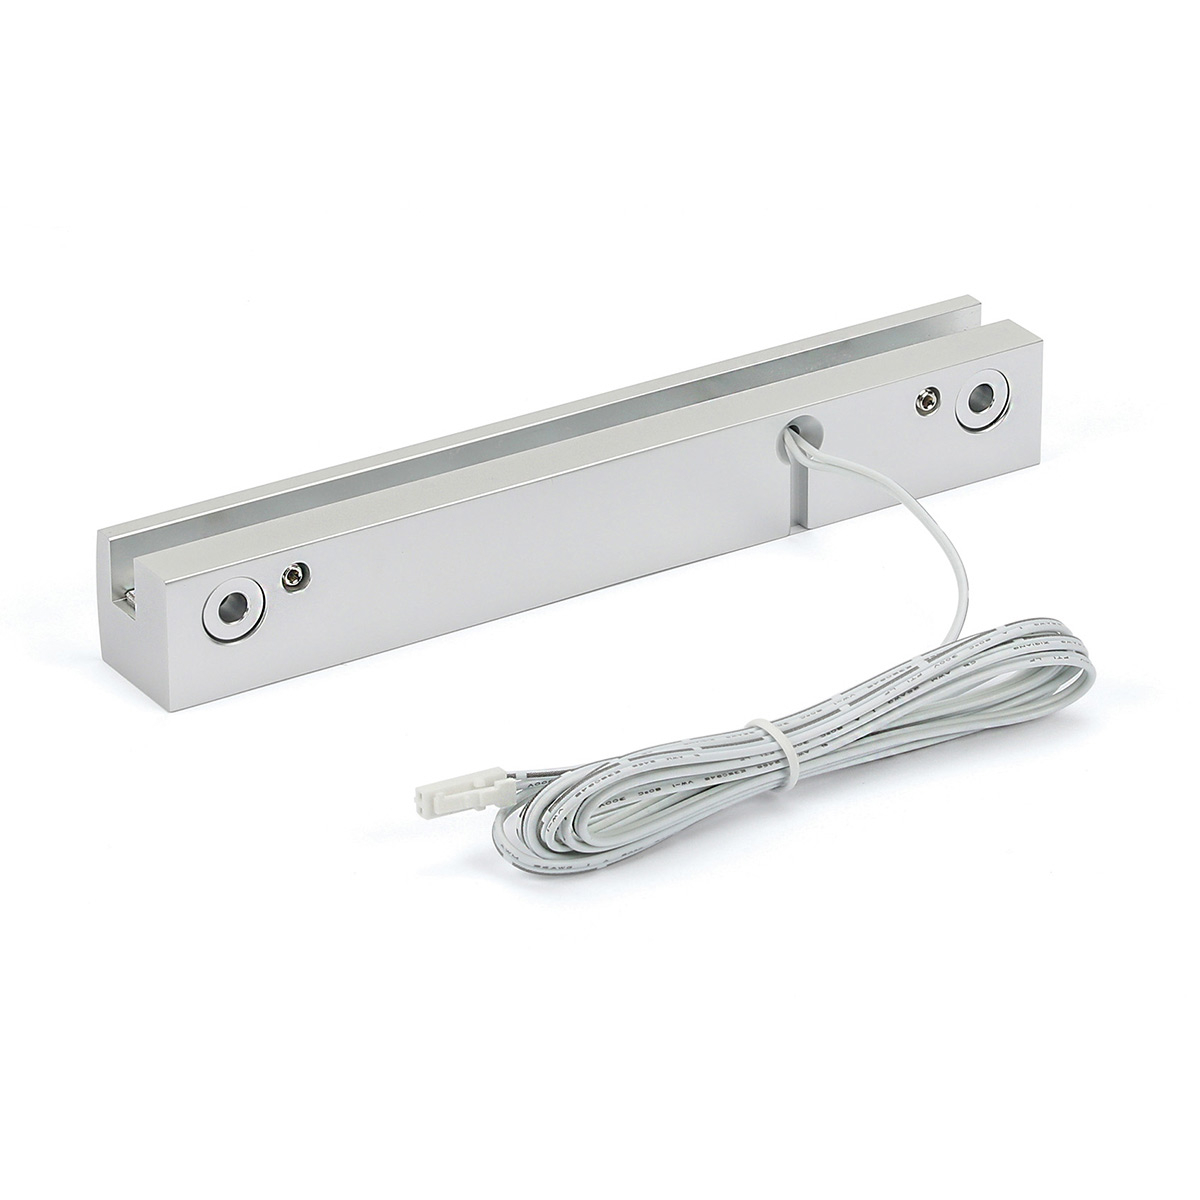 BLUE LED Sign Clamp in 11'' (280 mm) length X 1'' (25.4 mm) Silver satin aluminum finish.Mount Kit Supports Signs Up To 5/16'' Thick, Wall Mount, Low Voltage transformer included.